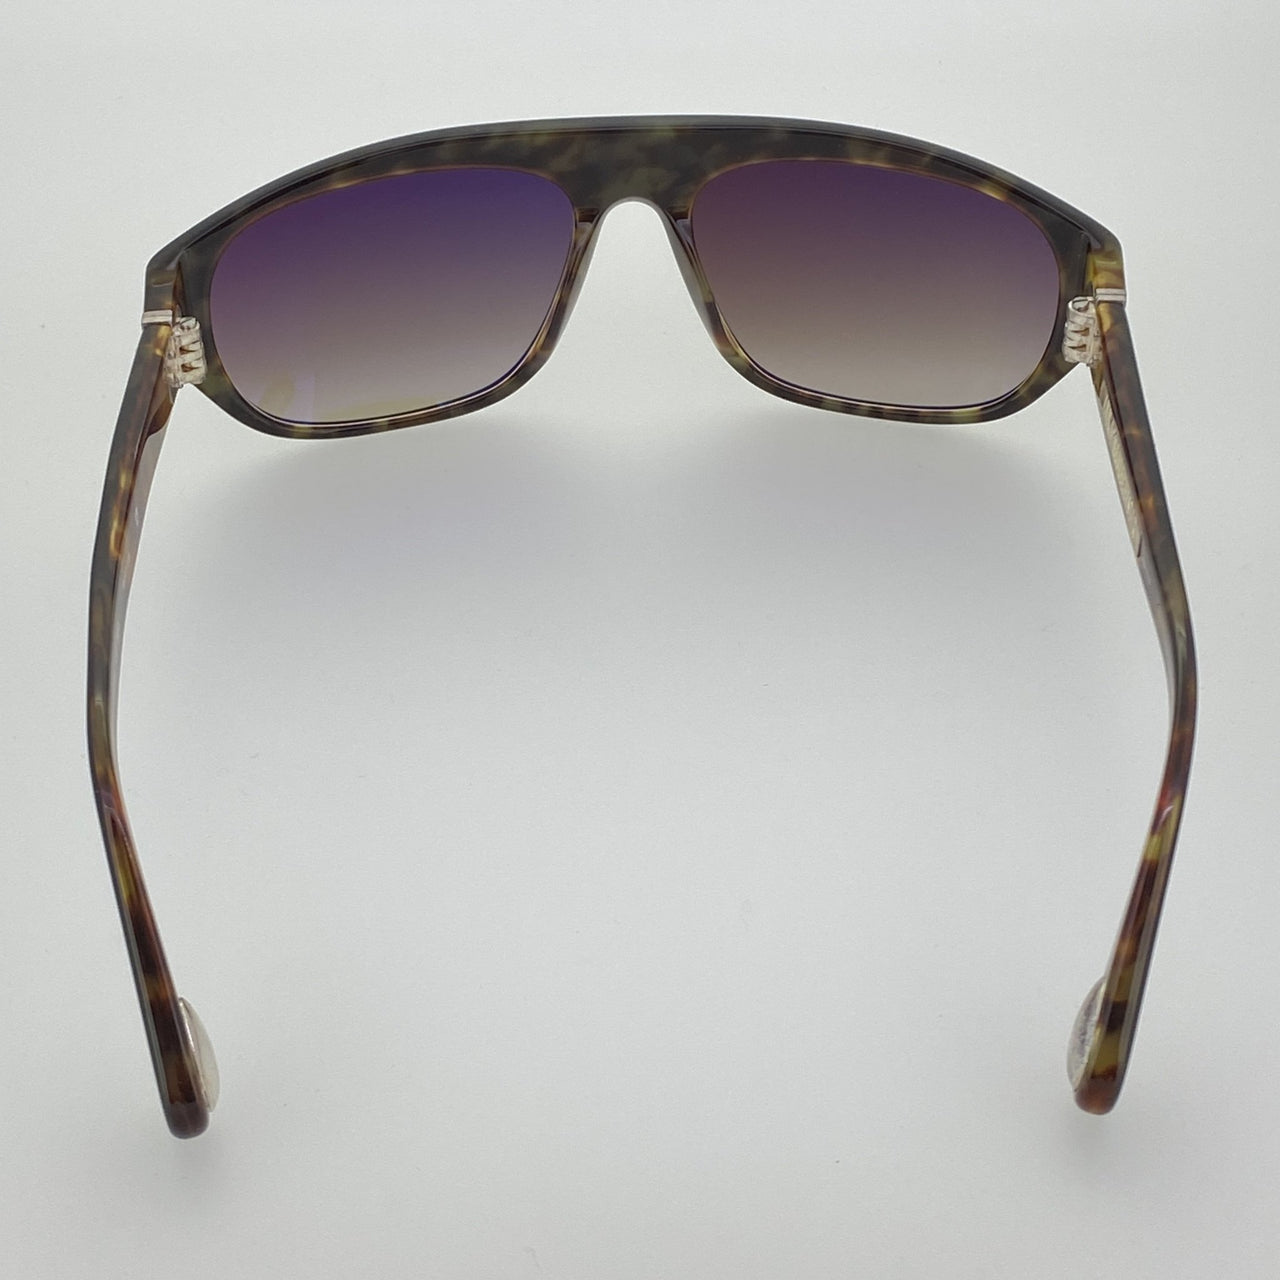 Ann Demeulemeester Sunglasses Black Tortoise Shell Flat Top 925 Silver with Brown Lenses AD1C6SUN - Watches & Crystals